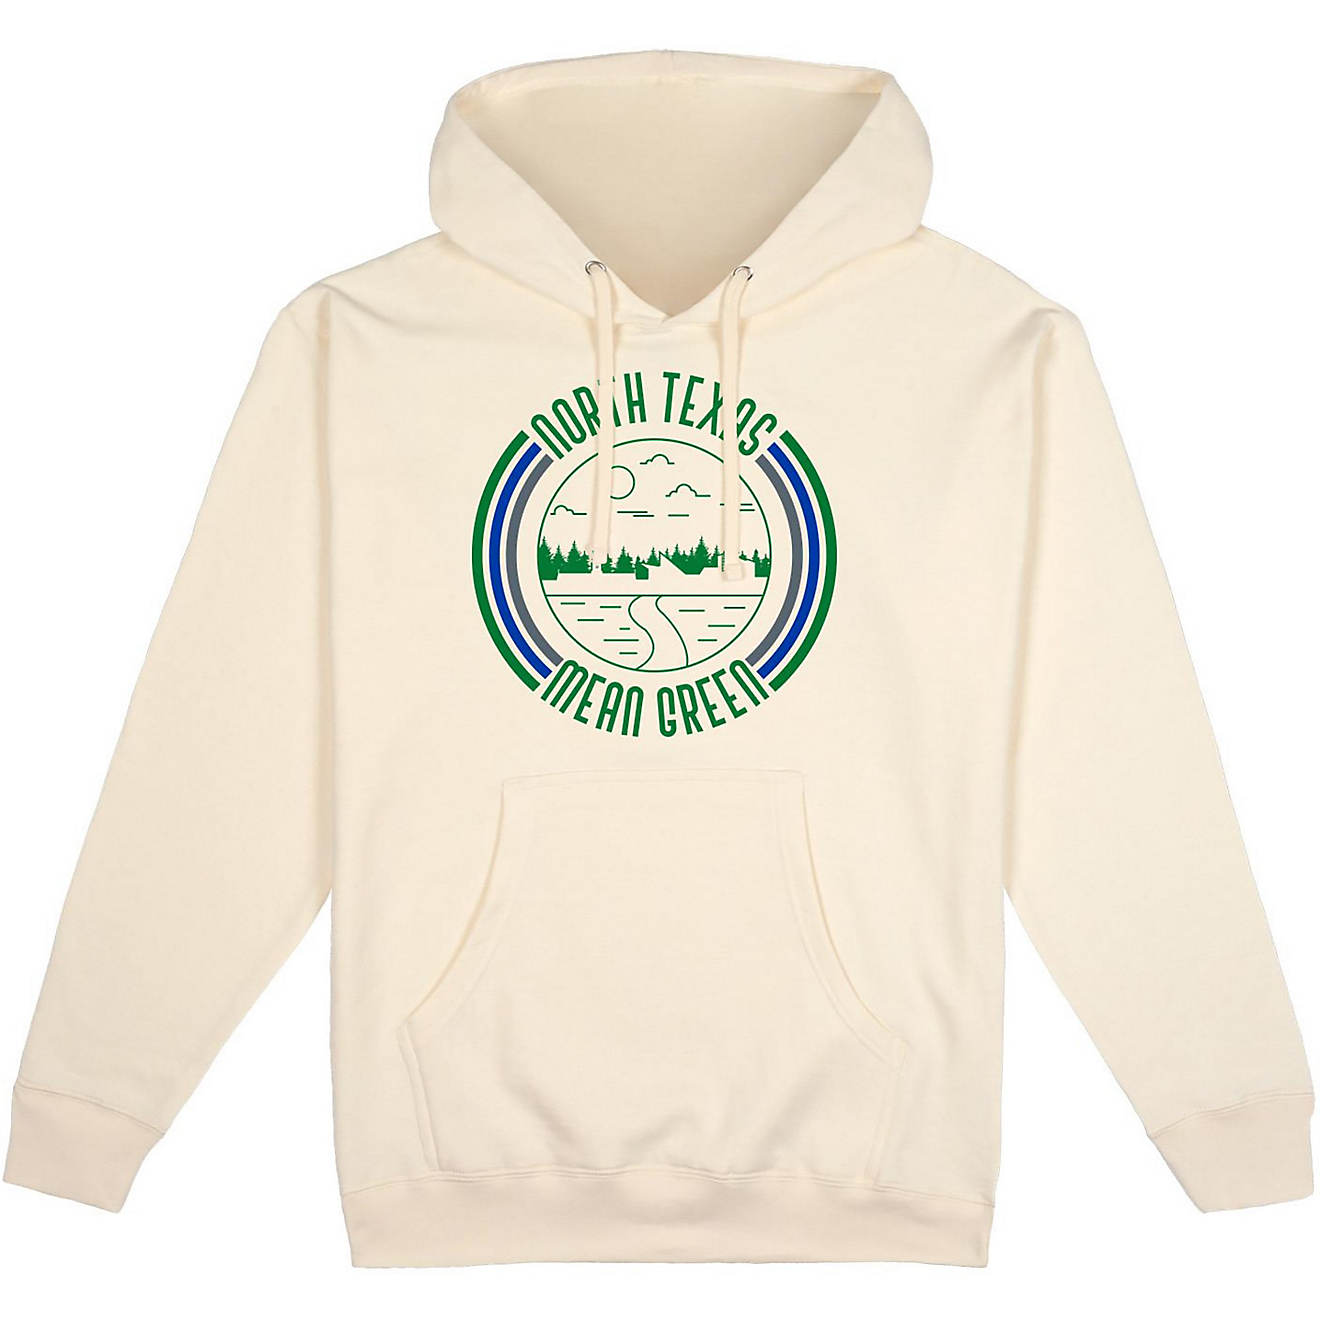 Uscape Apparel Men's University of North Texas Pullover Hoodie                                                                   - view number 1